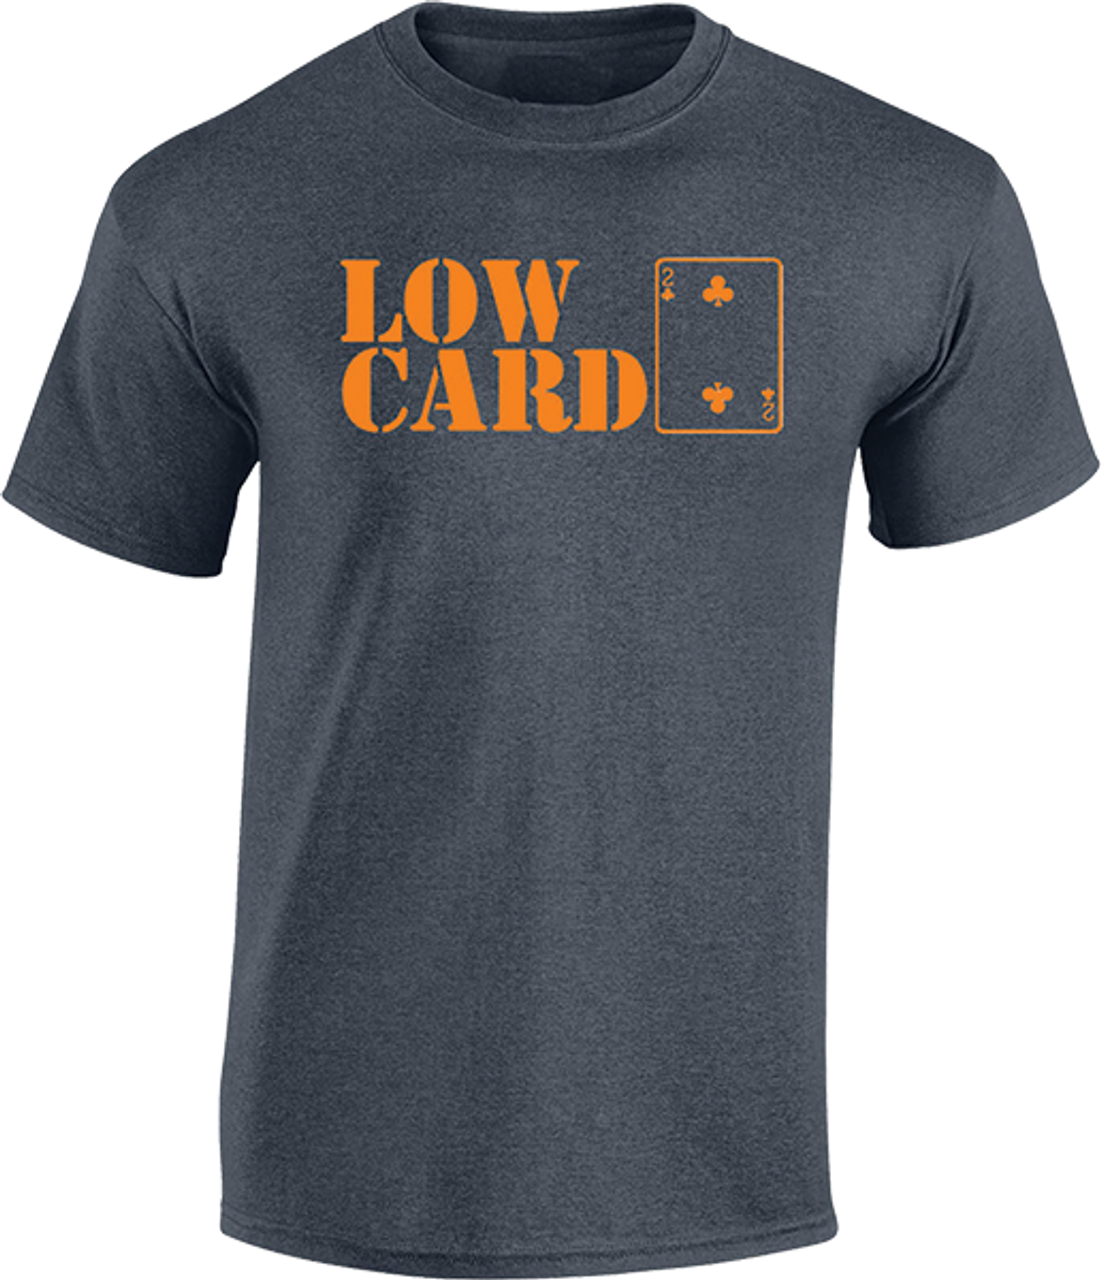 LOWCARD STACKED SS TSHIRT SMALL CHARCOAL HEATHER GREY/ORG